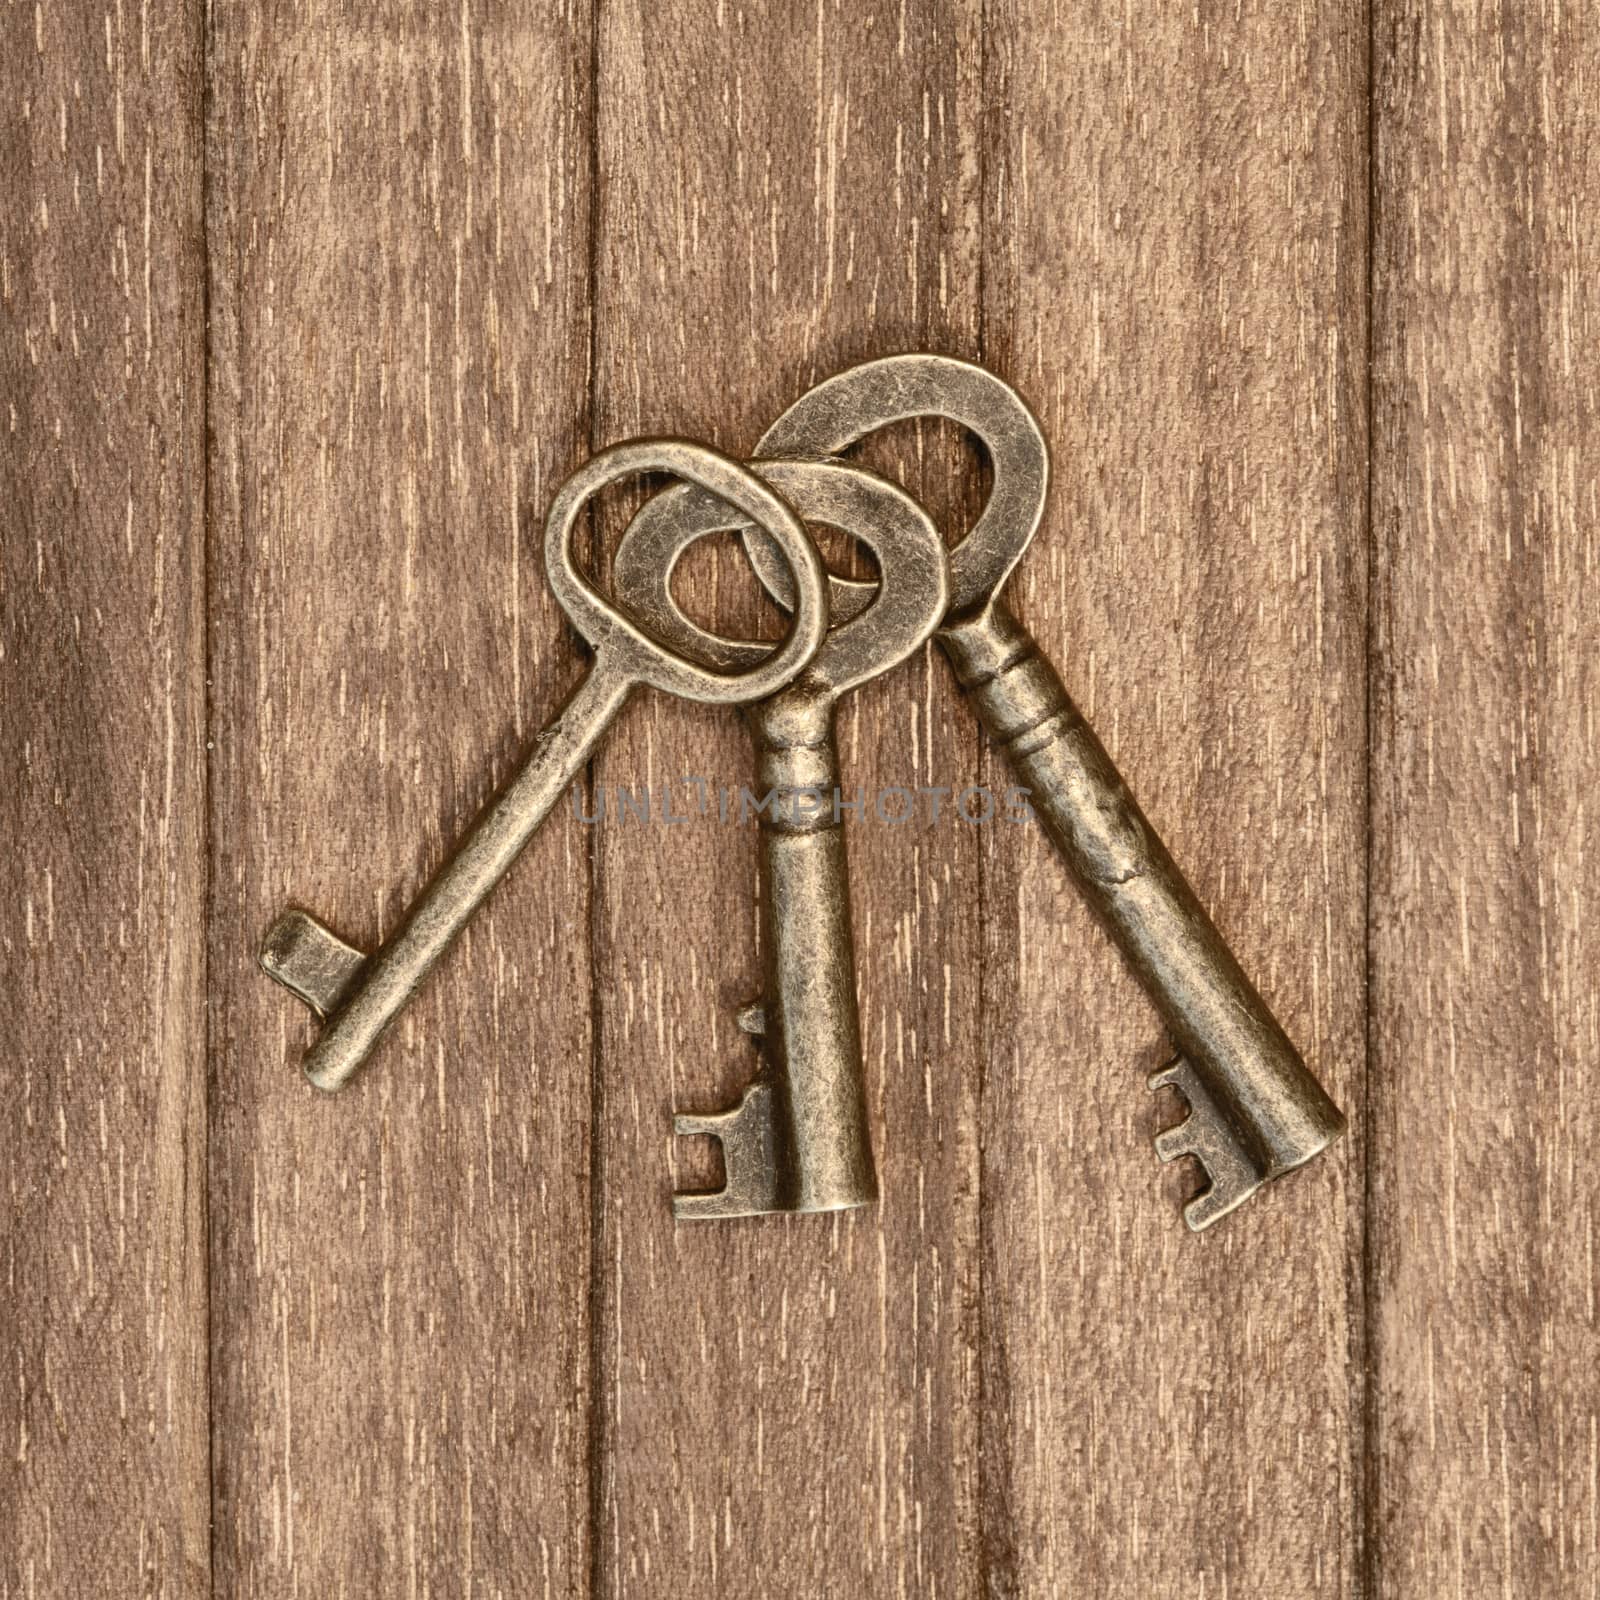 three old keys on a wooden background